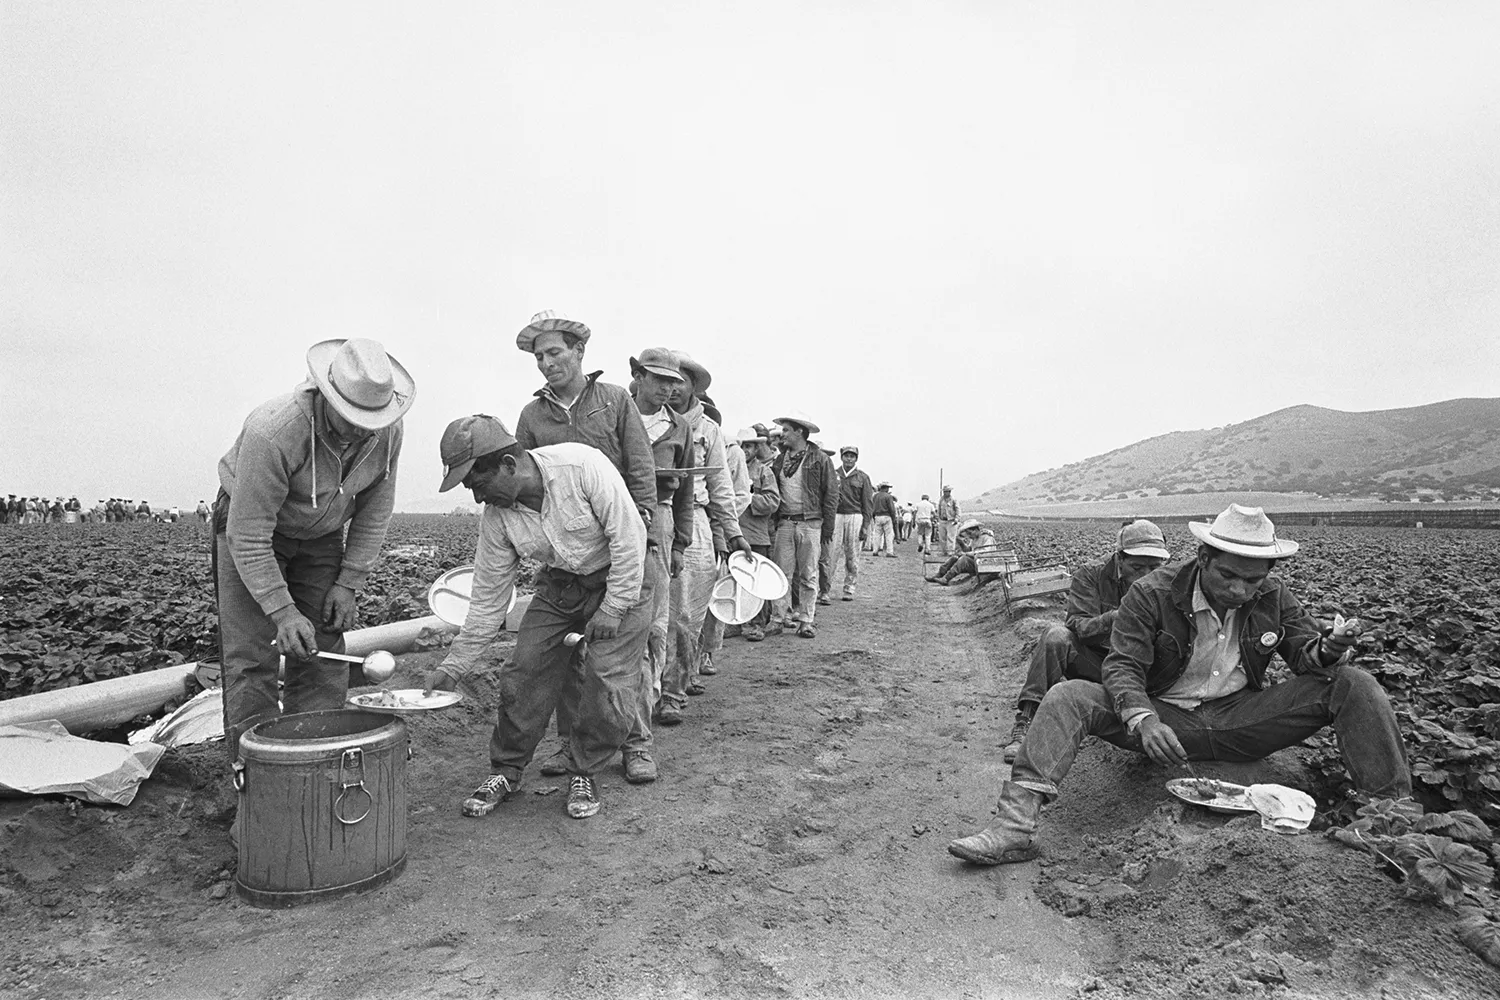 This black-and-white historic photo from 1963 shows braceros, agricultural workers, lining up with plates between rows of a field as they wait in line for a meal. A man at the front of the line ladles food into their plates from a big metal pot.